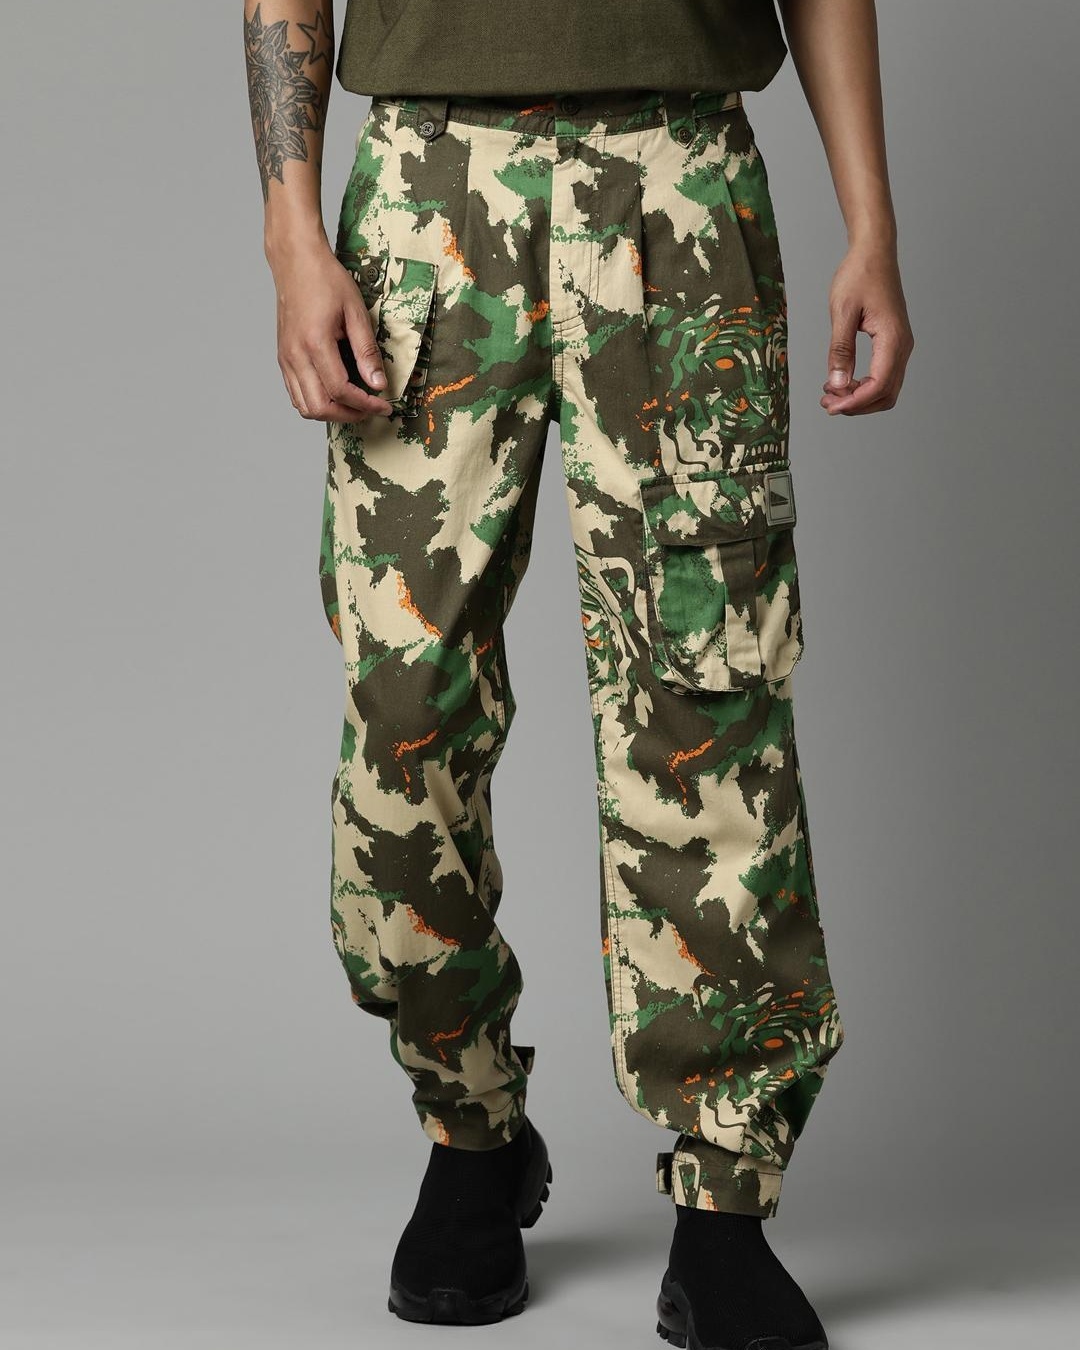 Shop Camo Cargo Pants for Men from latest collection at Forever 21  430708